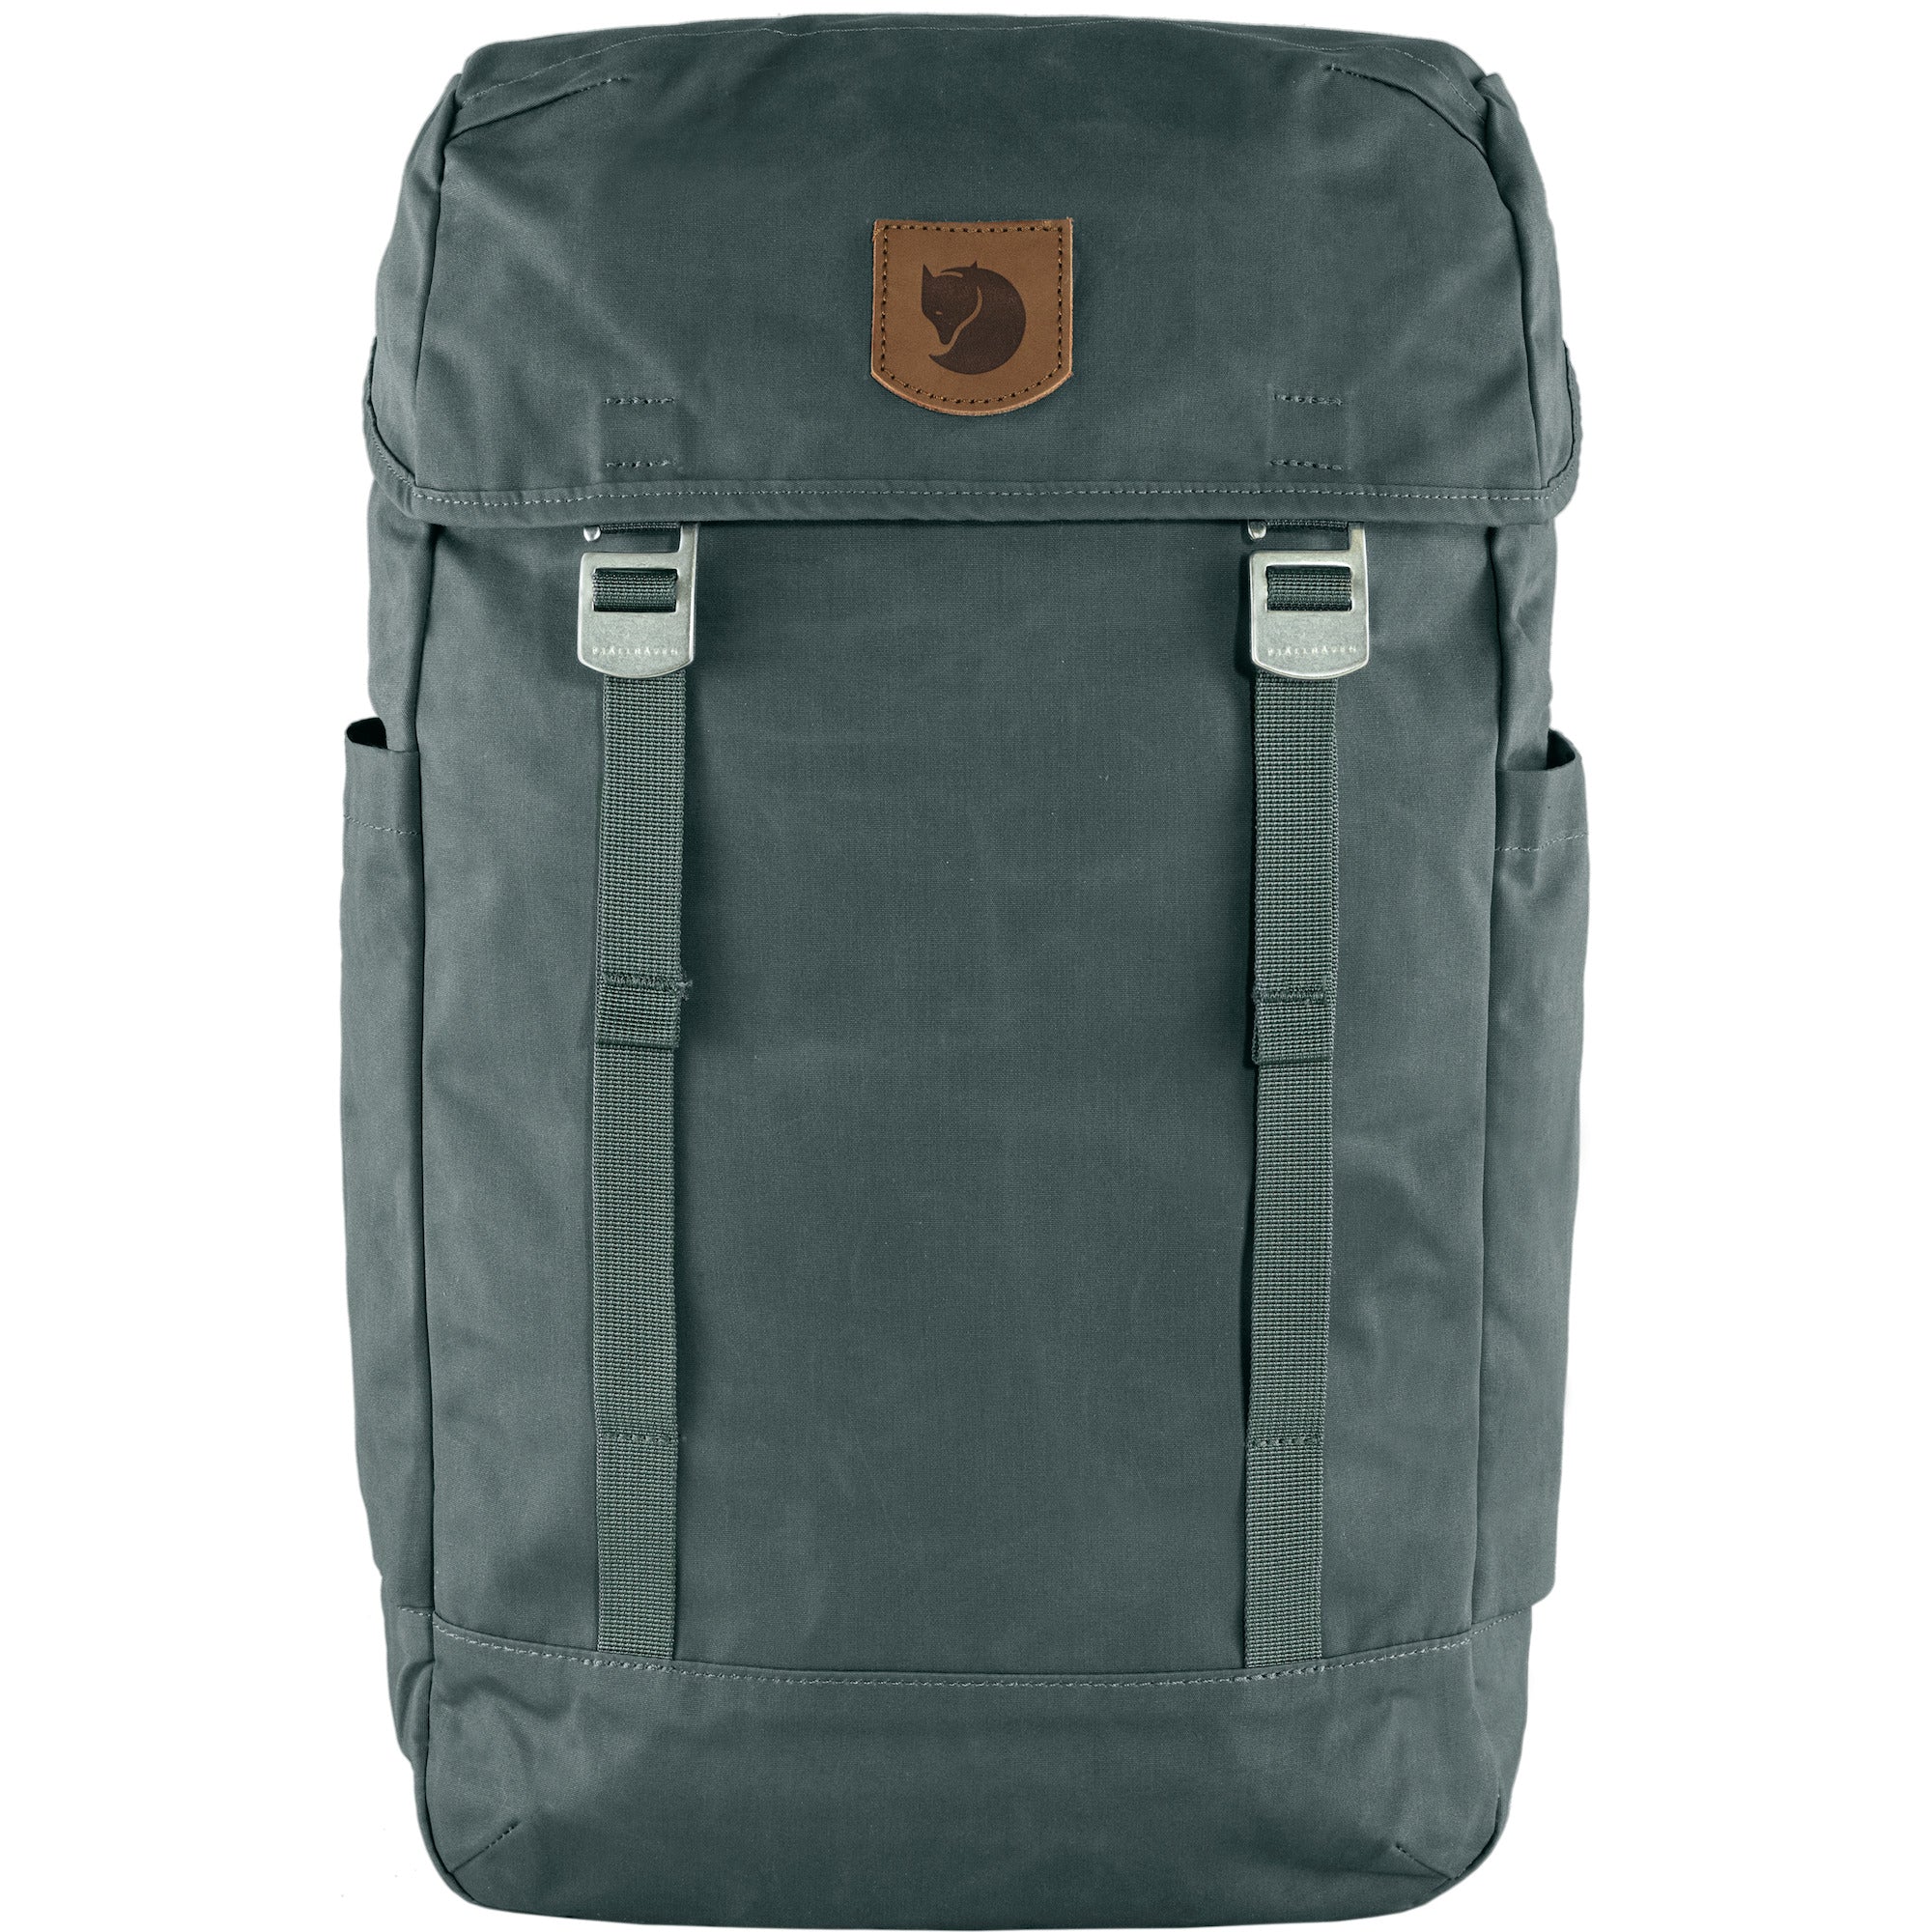 Greenland Top Backpack